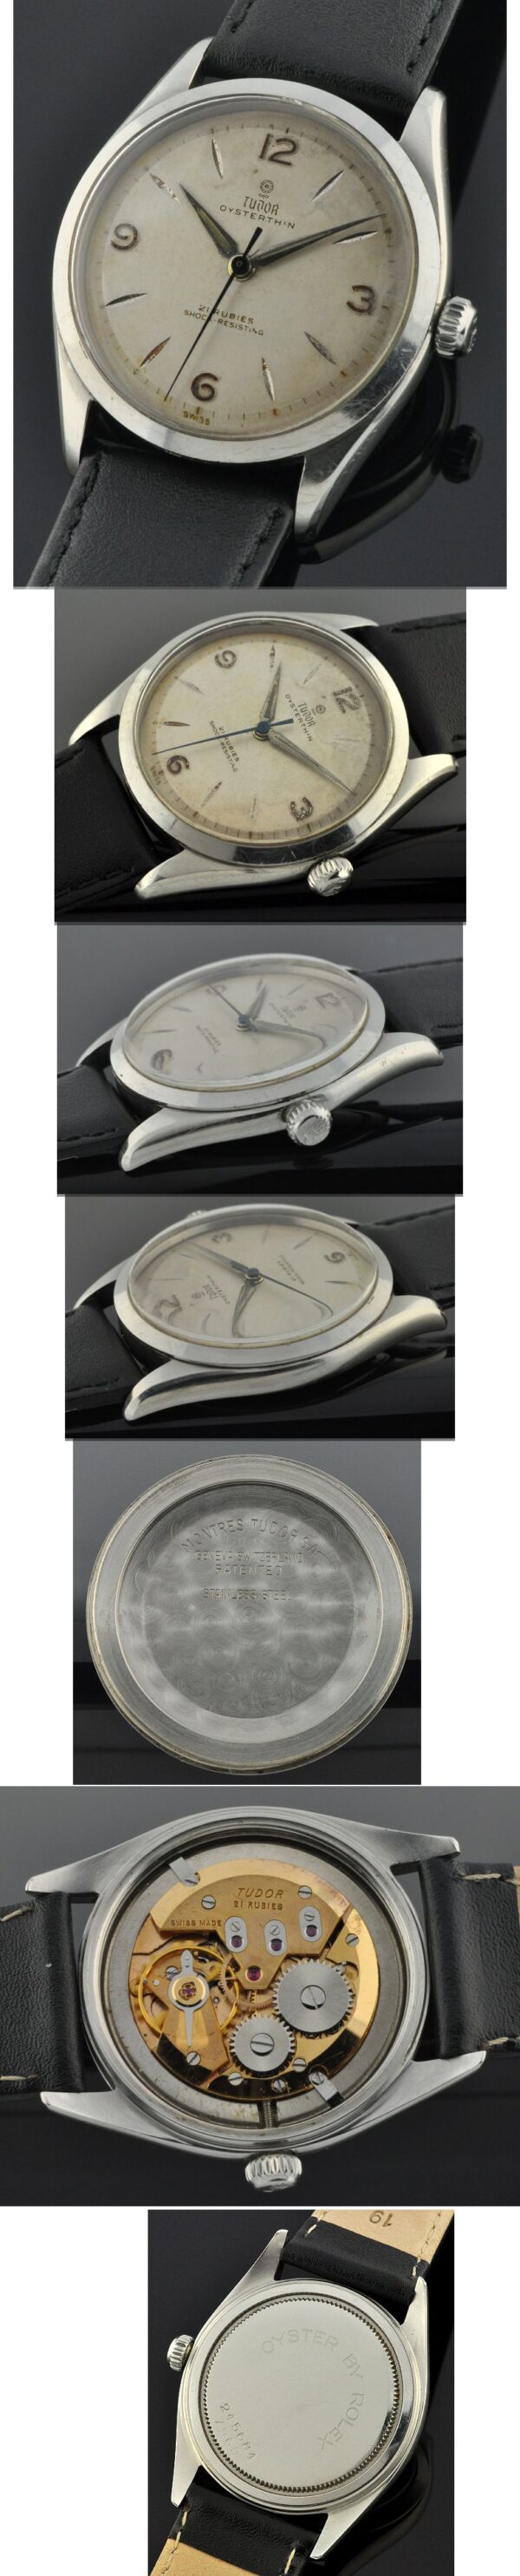 1950s Tudor Oysterthin stainless steel watch with original Rolex Oyster winding crown, silver dial, and hands.